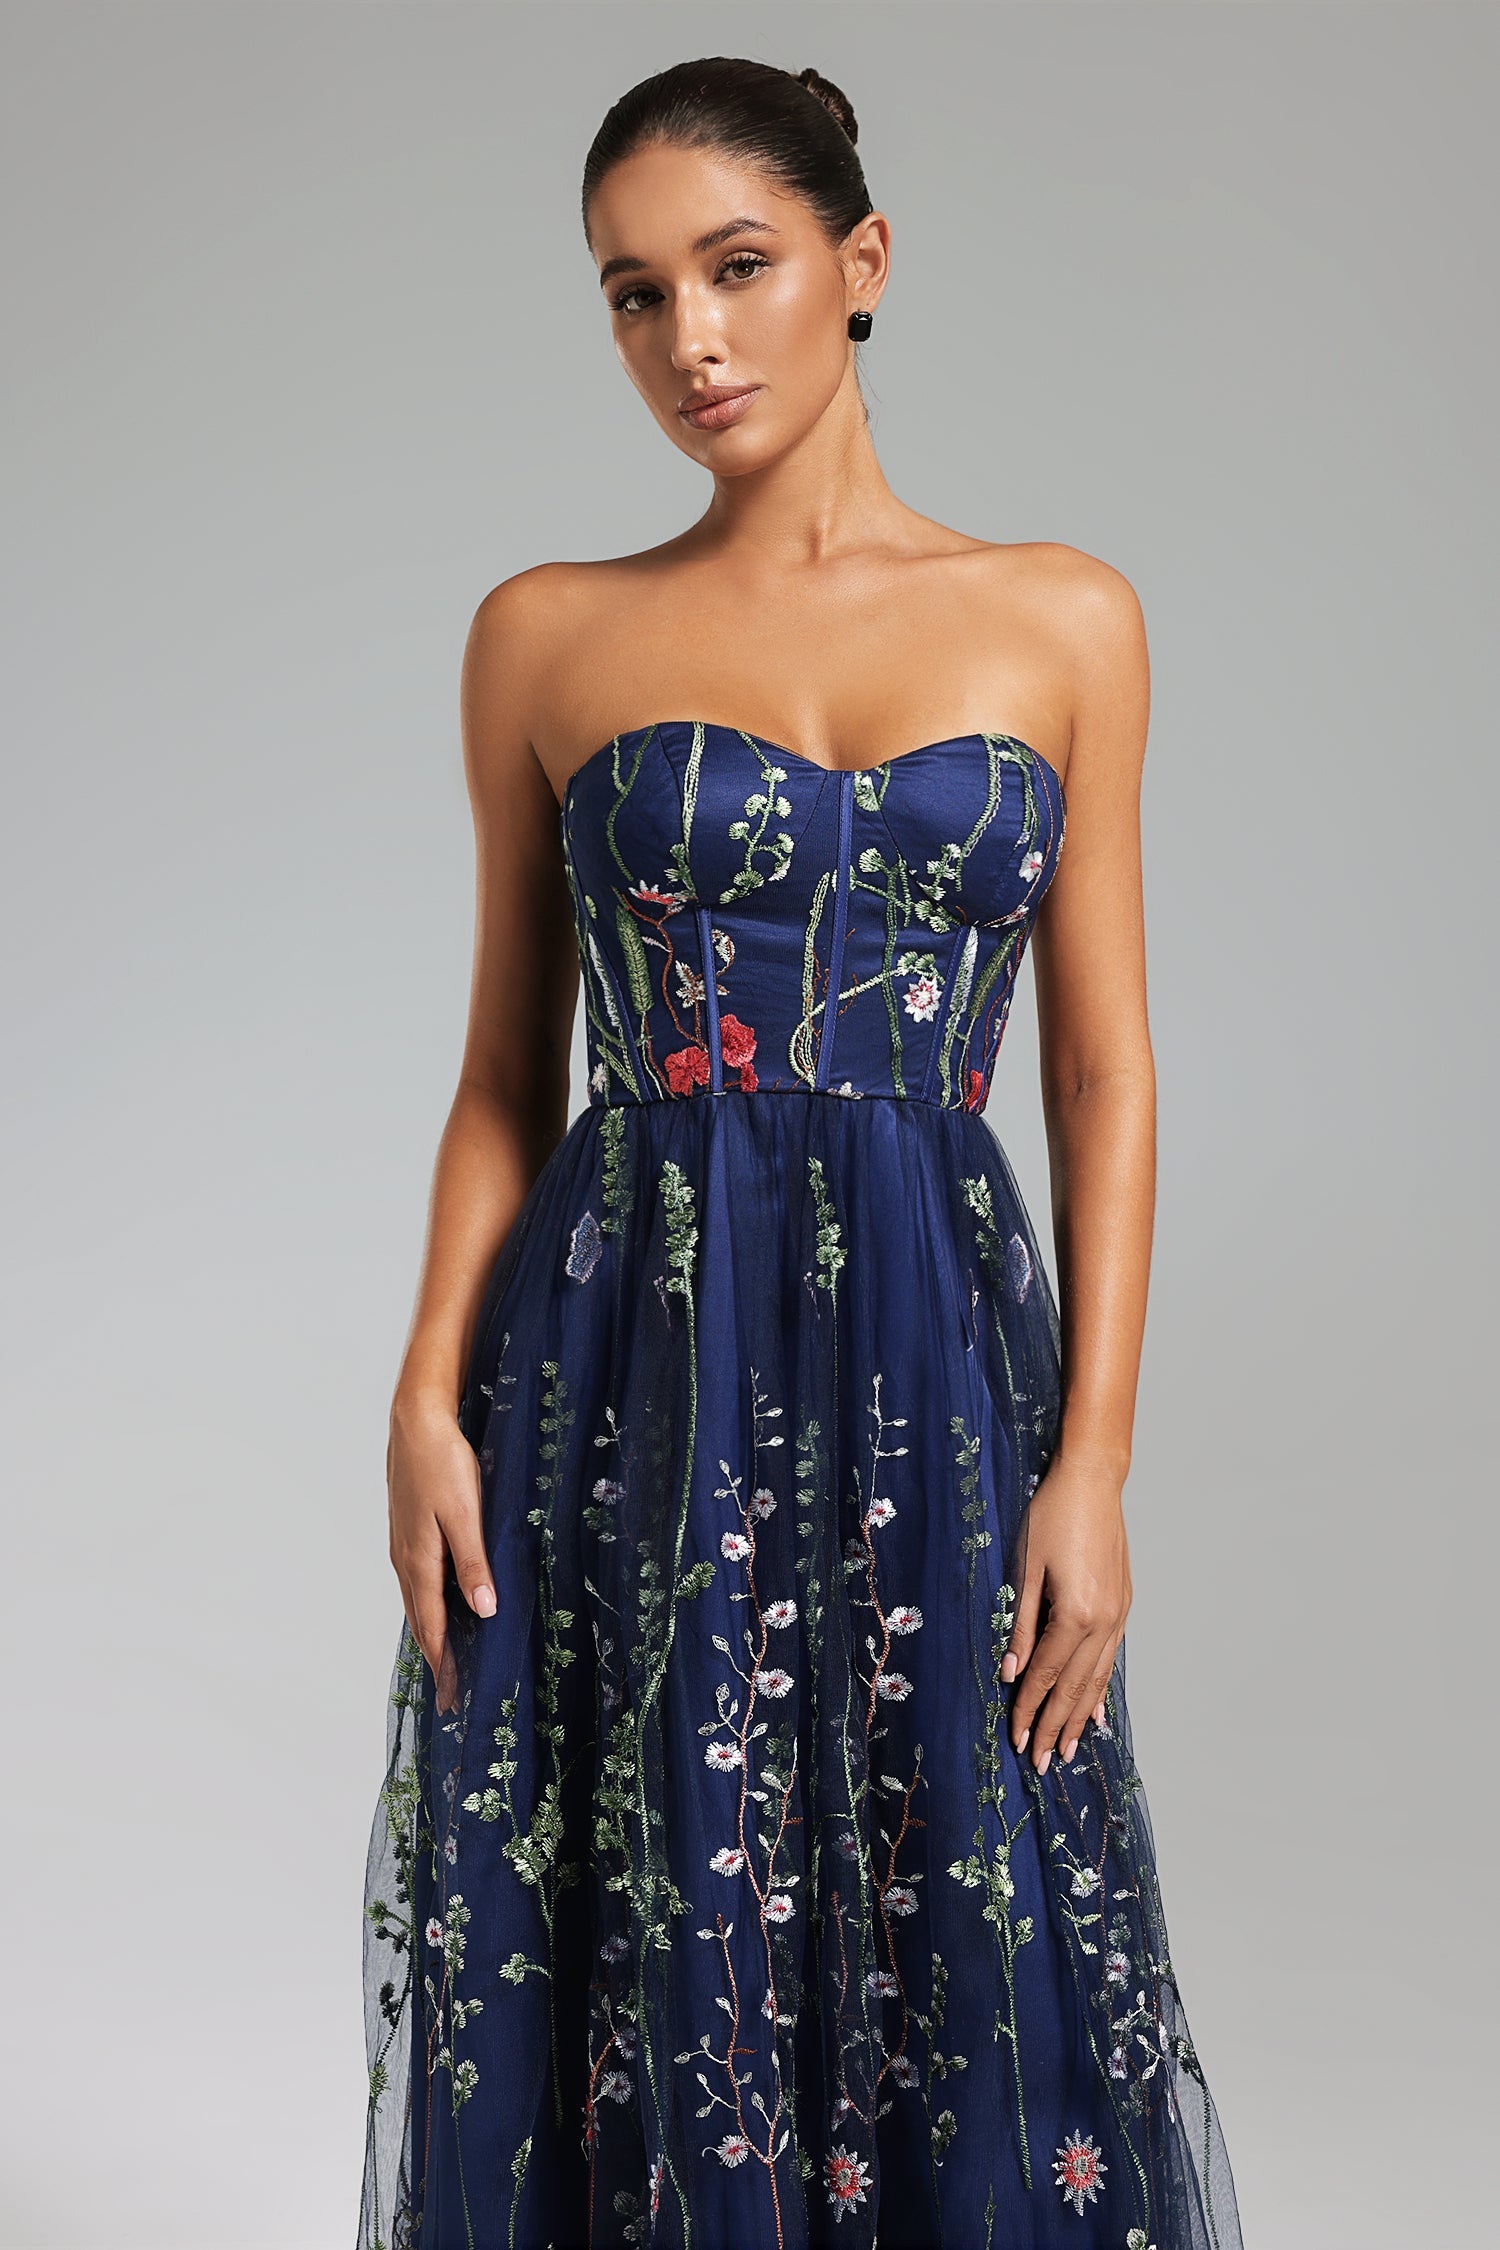 Tusare Open Shoulder Embroidery Maxi Dress - Floral